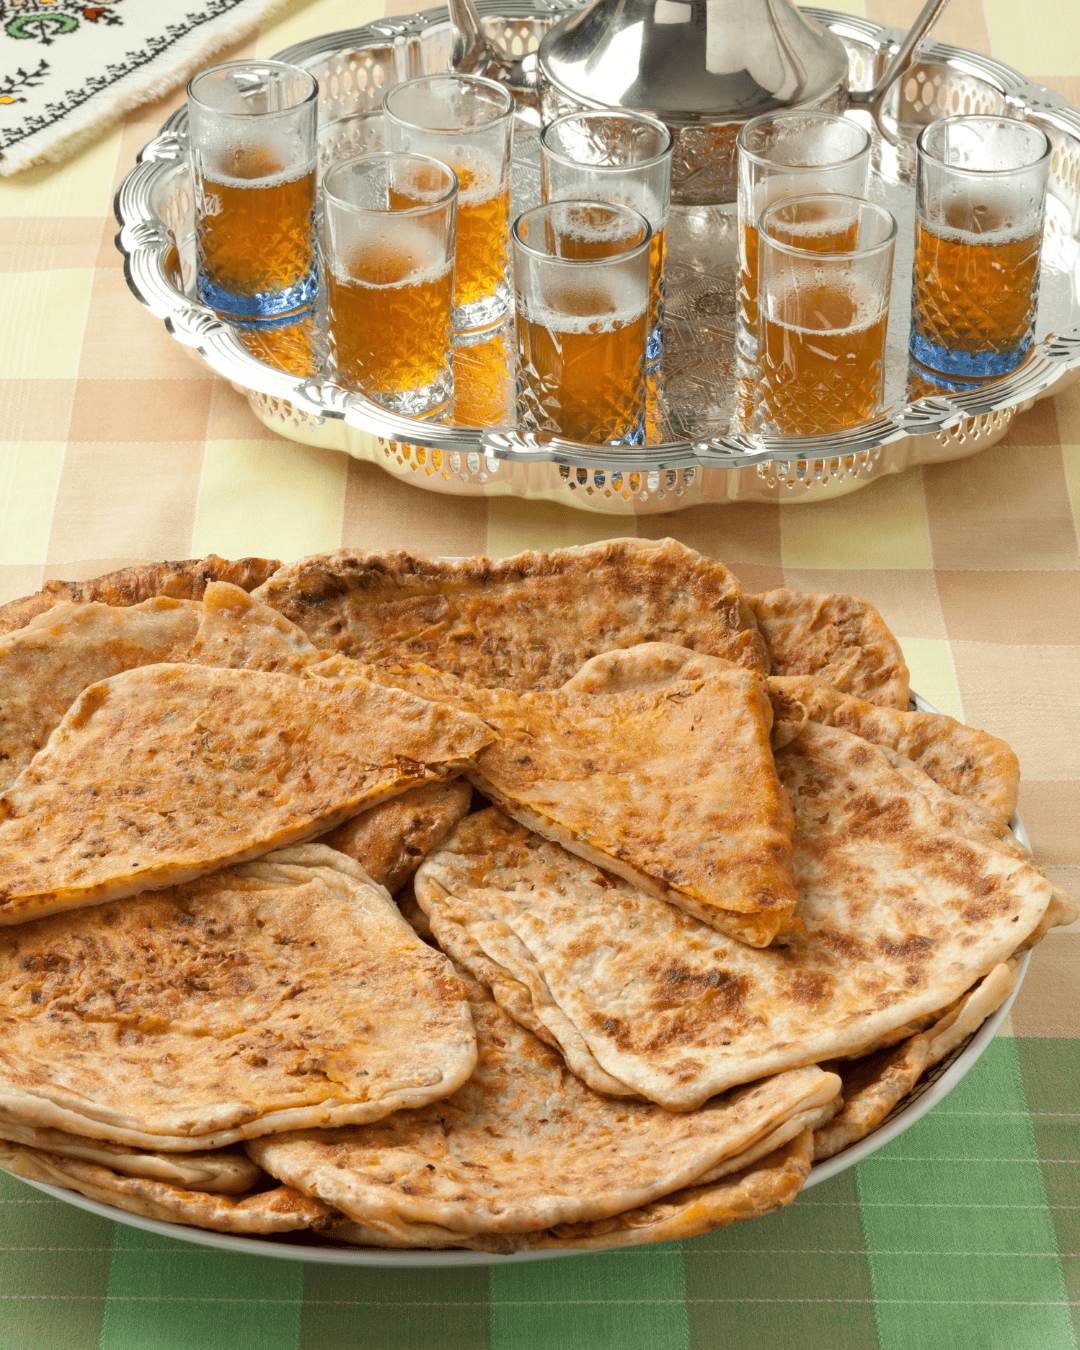 Msemmen - Breakfast in Morocco, Breakfast in Morocco - 25 Traditional Moroccan Breakfast for You To Try When Visiting Morocco